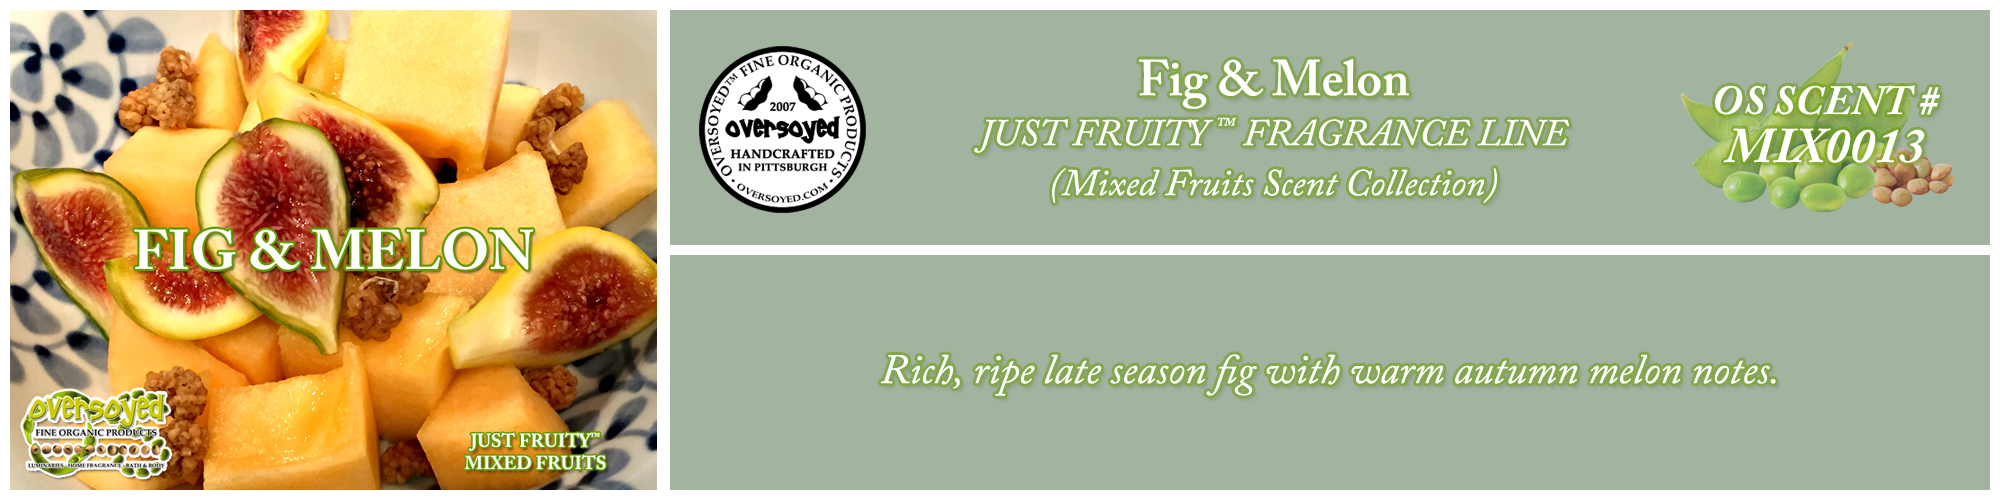 Fig & Melon Handcrafted Products Collection